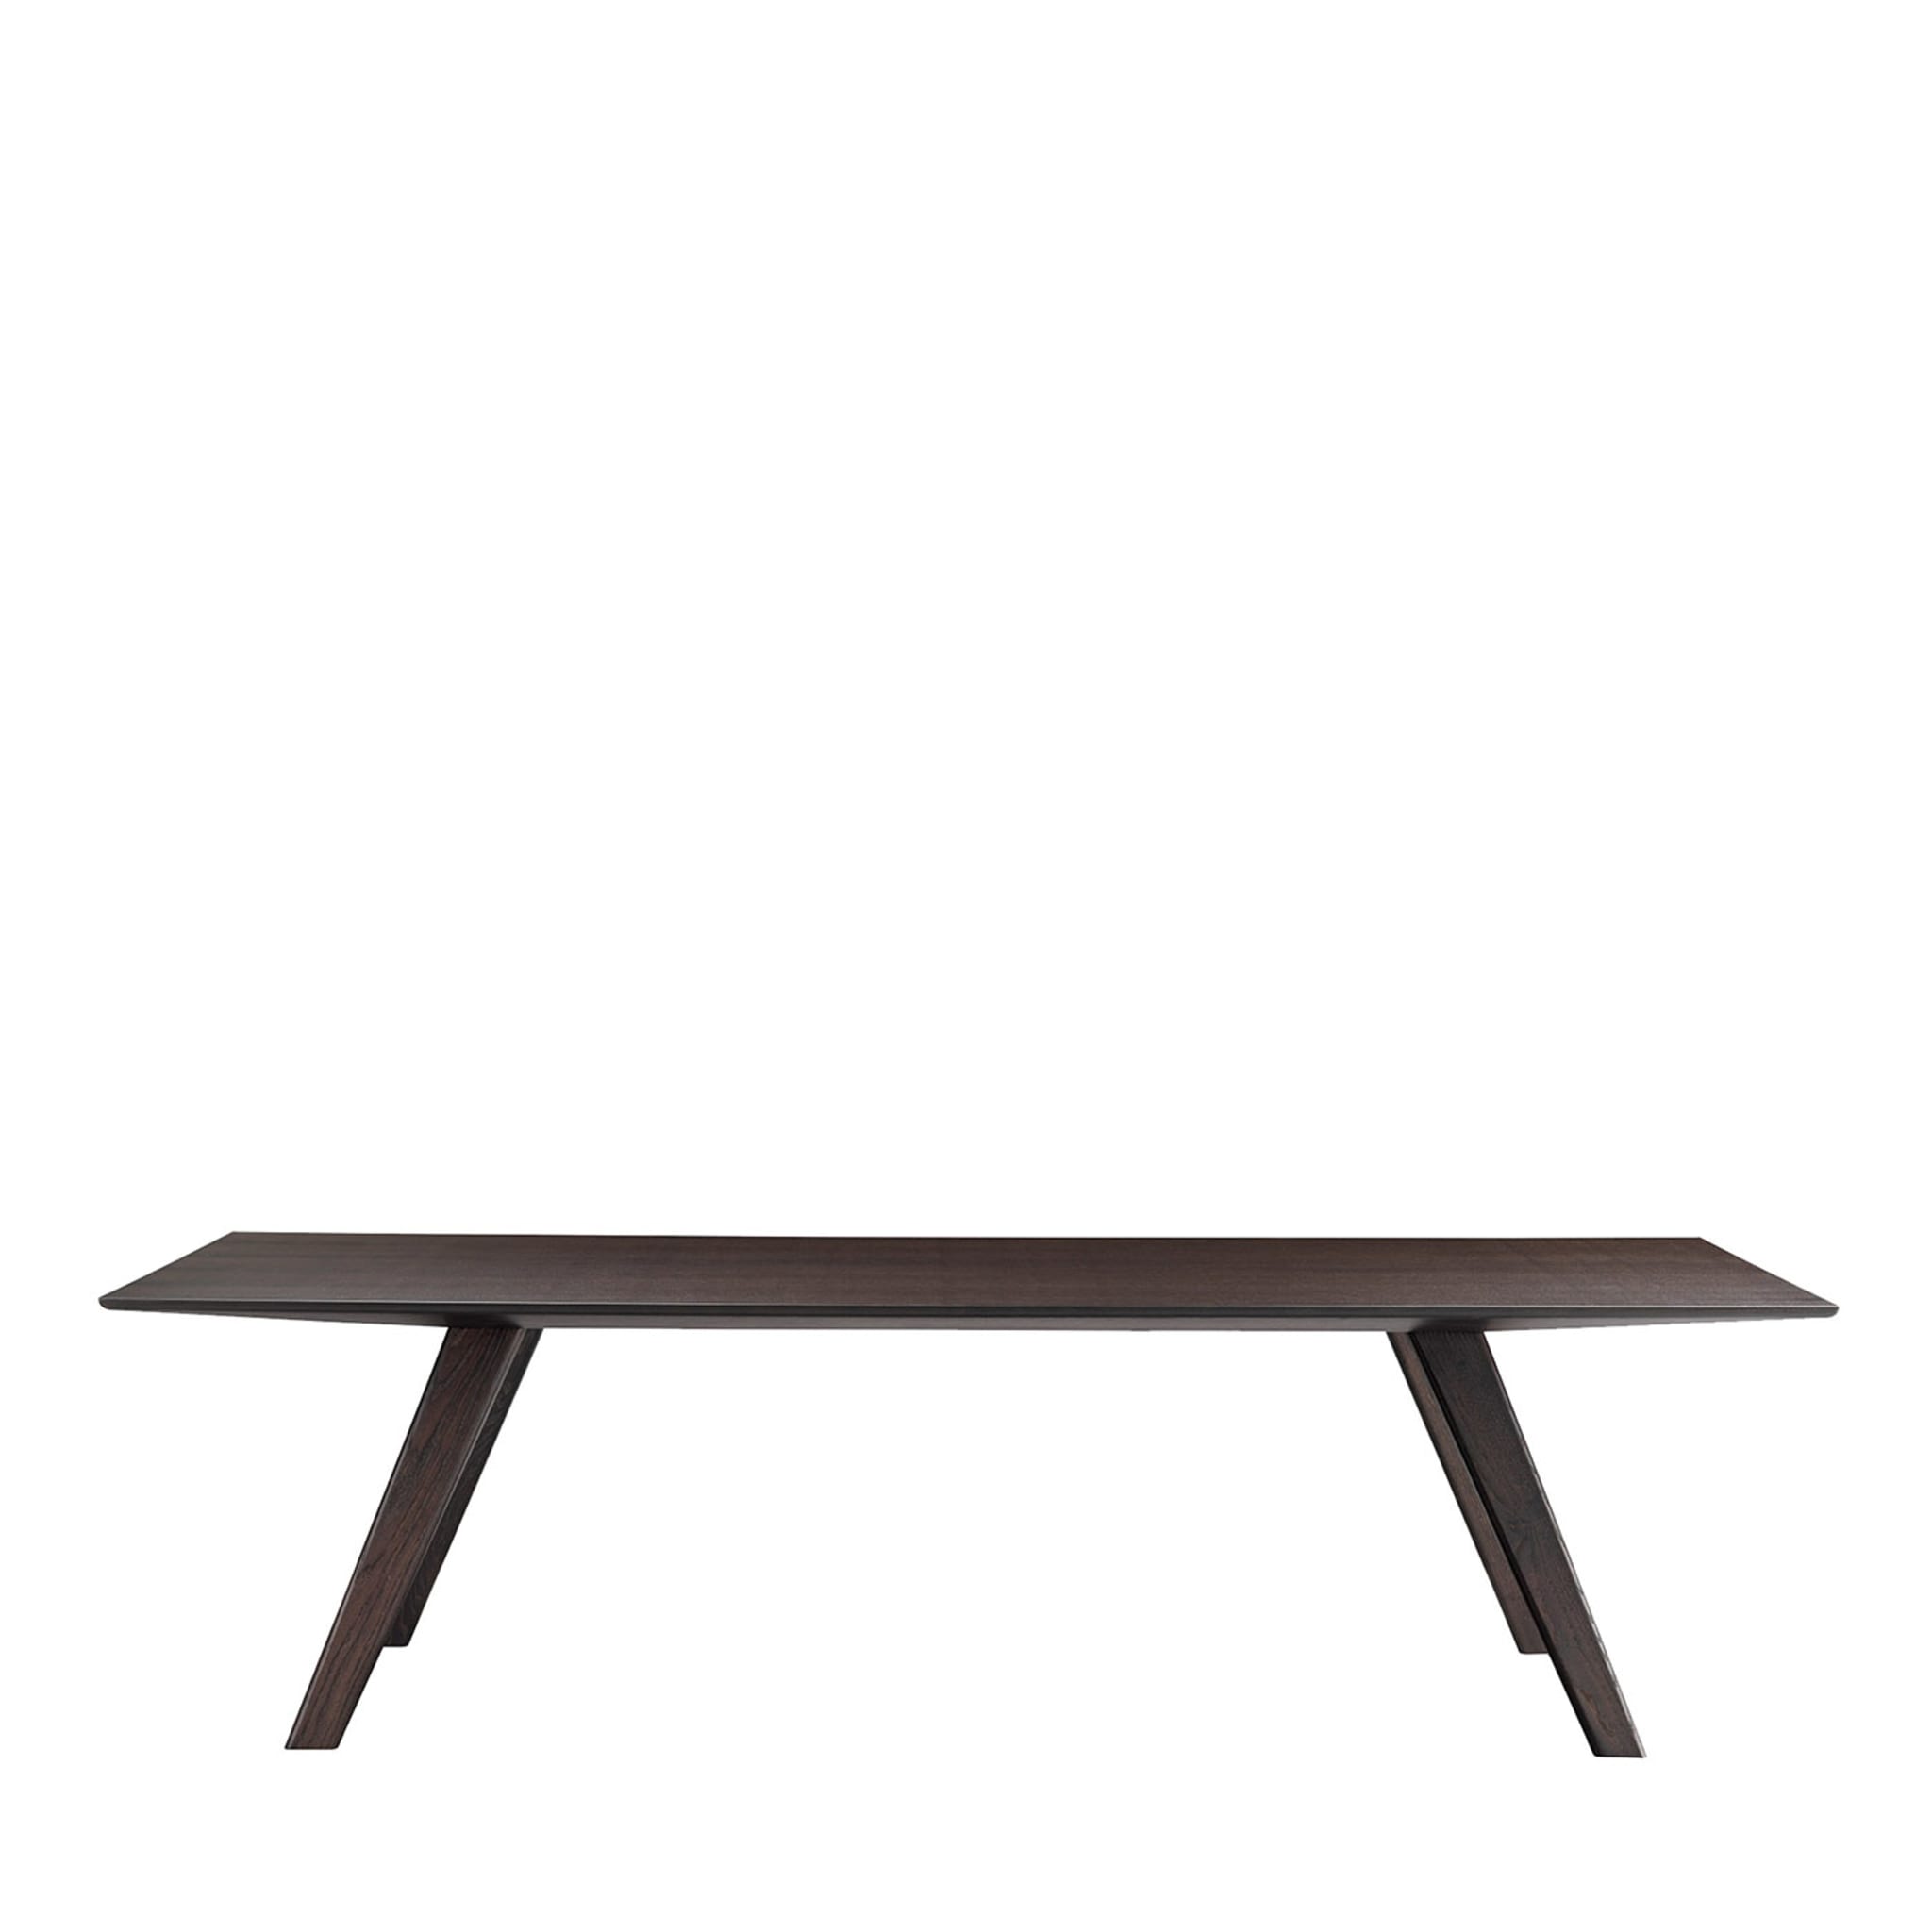 Locust Brown Dining Table by Stefano Giovannoni - Main view